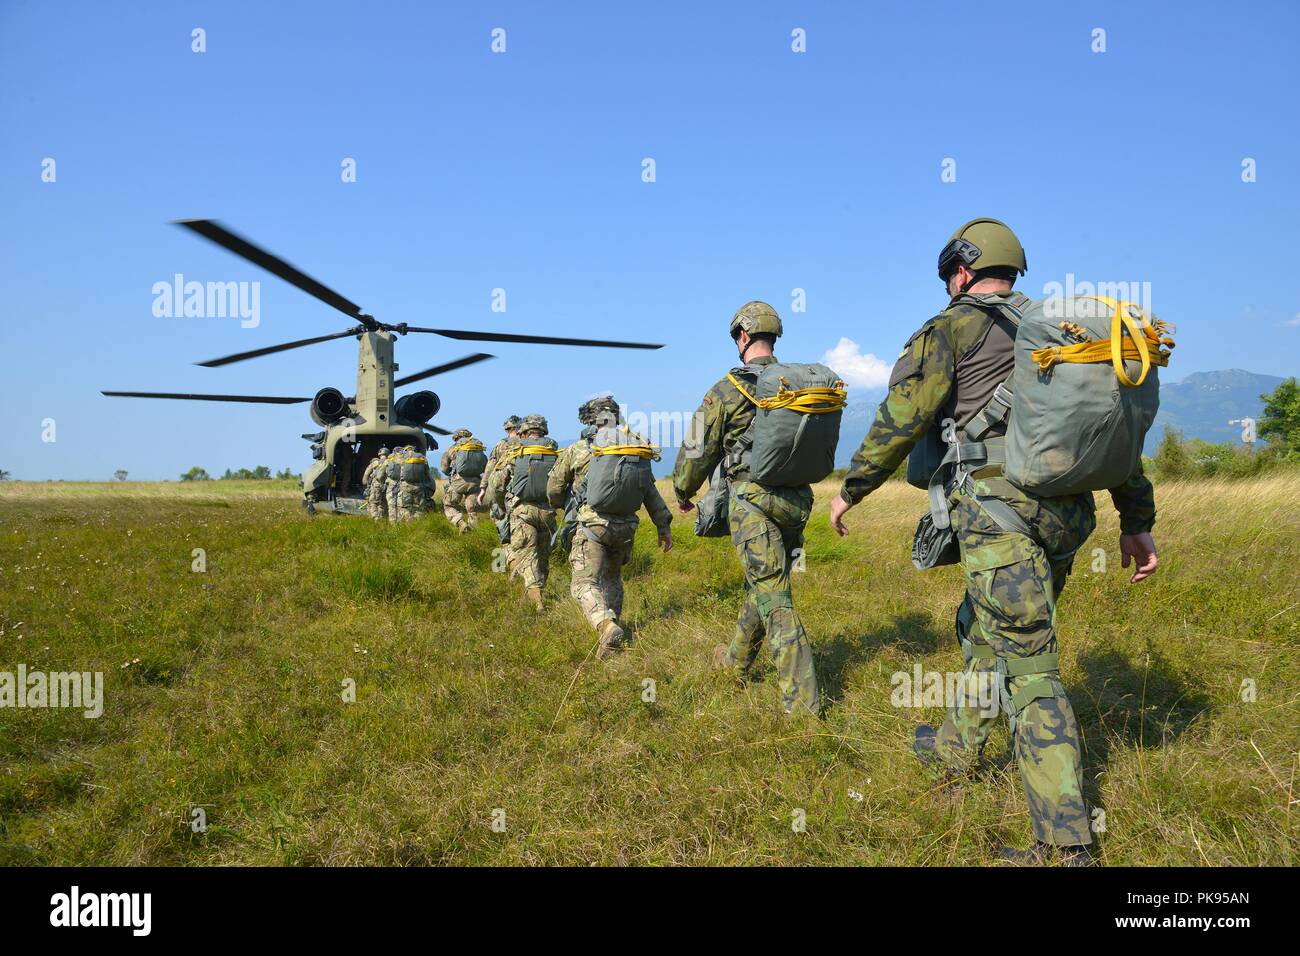 U.S. Army Paratroopers, assigned to the 2nd Battalion, 503rd Infantry Regiment, 173rd Airborne Brigade, along with Czechs Paratroopers, board a 12th Combat Aviation Brigade CH-47 Chinook helicopter for an airborne operation at Juliet Drop Zone, Pordenone, Italy, August 22, 2018, August 22, 2018. The combined exercise demonstrates the multinational capacity building of the airborne community and focused on enhancing NATO operational standards and developing individual technical skills. (U.S. Army photo by Paolo Bovo). () Stock Photo